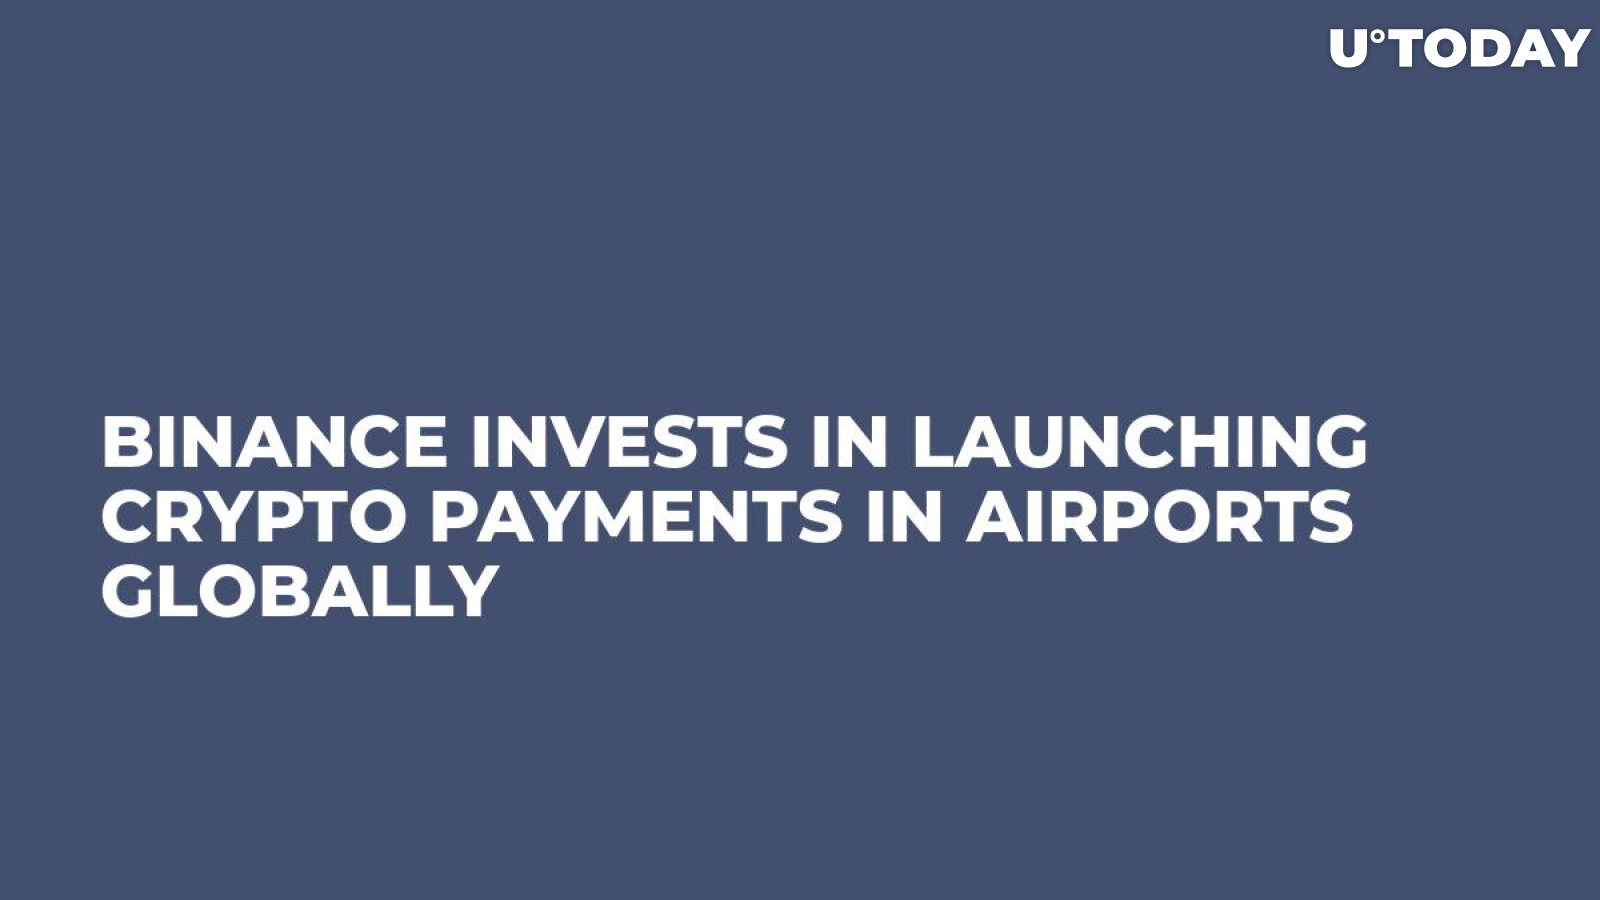 Binance Invests in Launching Crypto Payments in Airports Globally